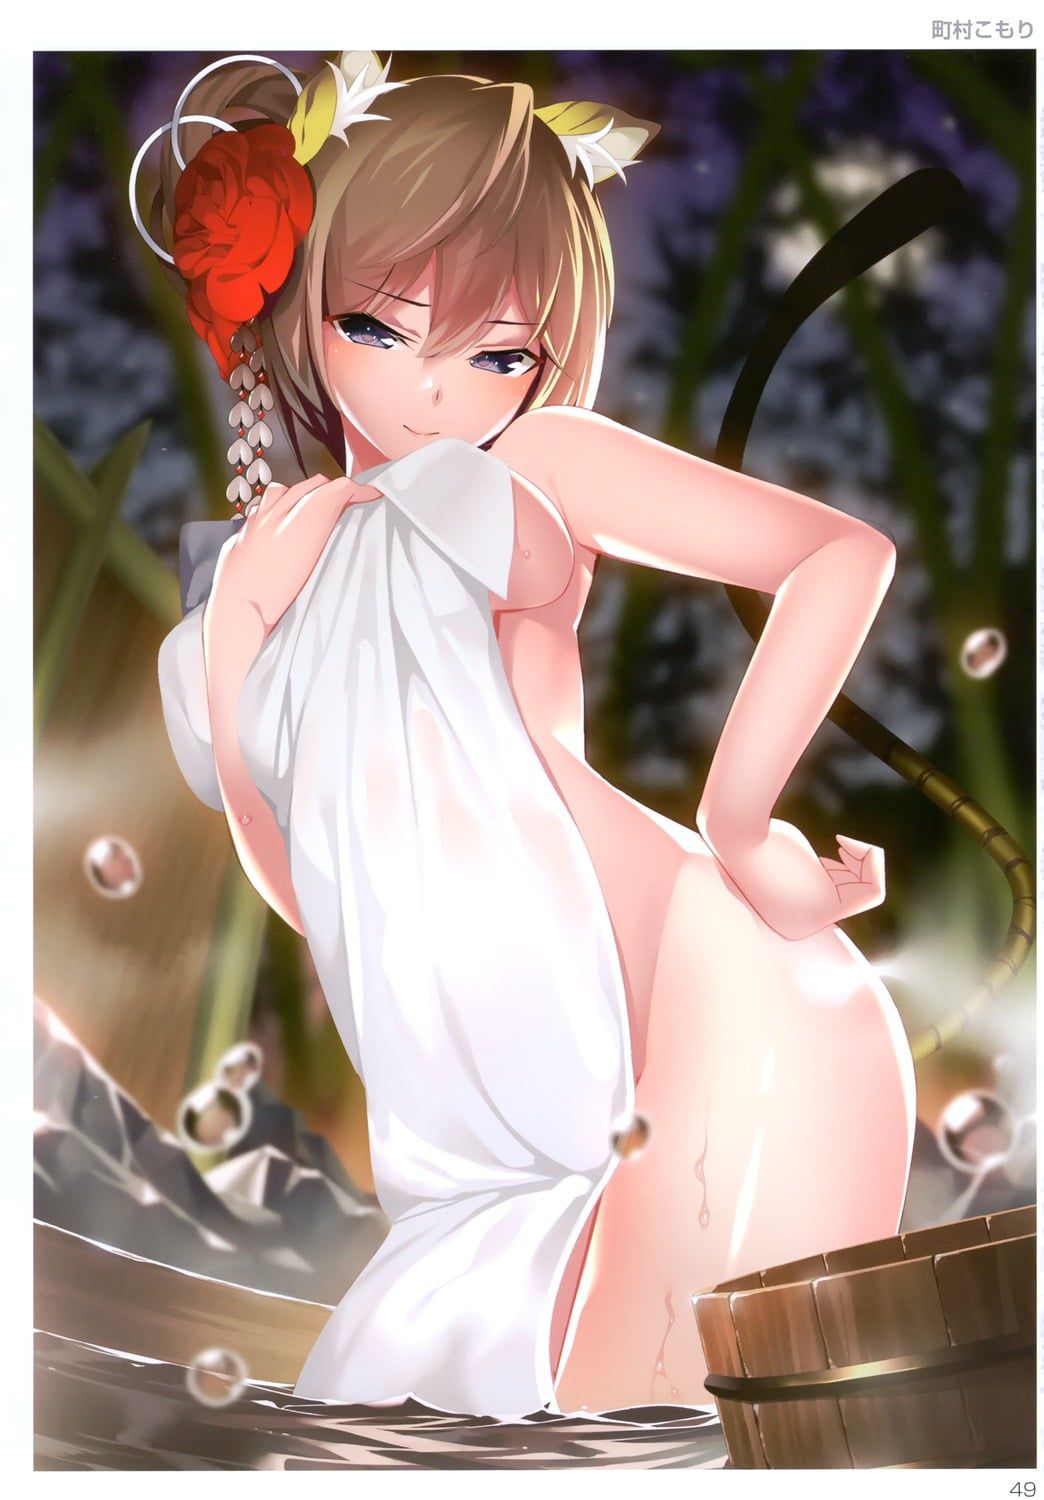 Let's gaze at the bath scene of a defenseless girl during relaxation time! 22